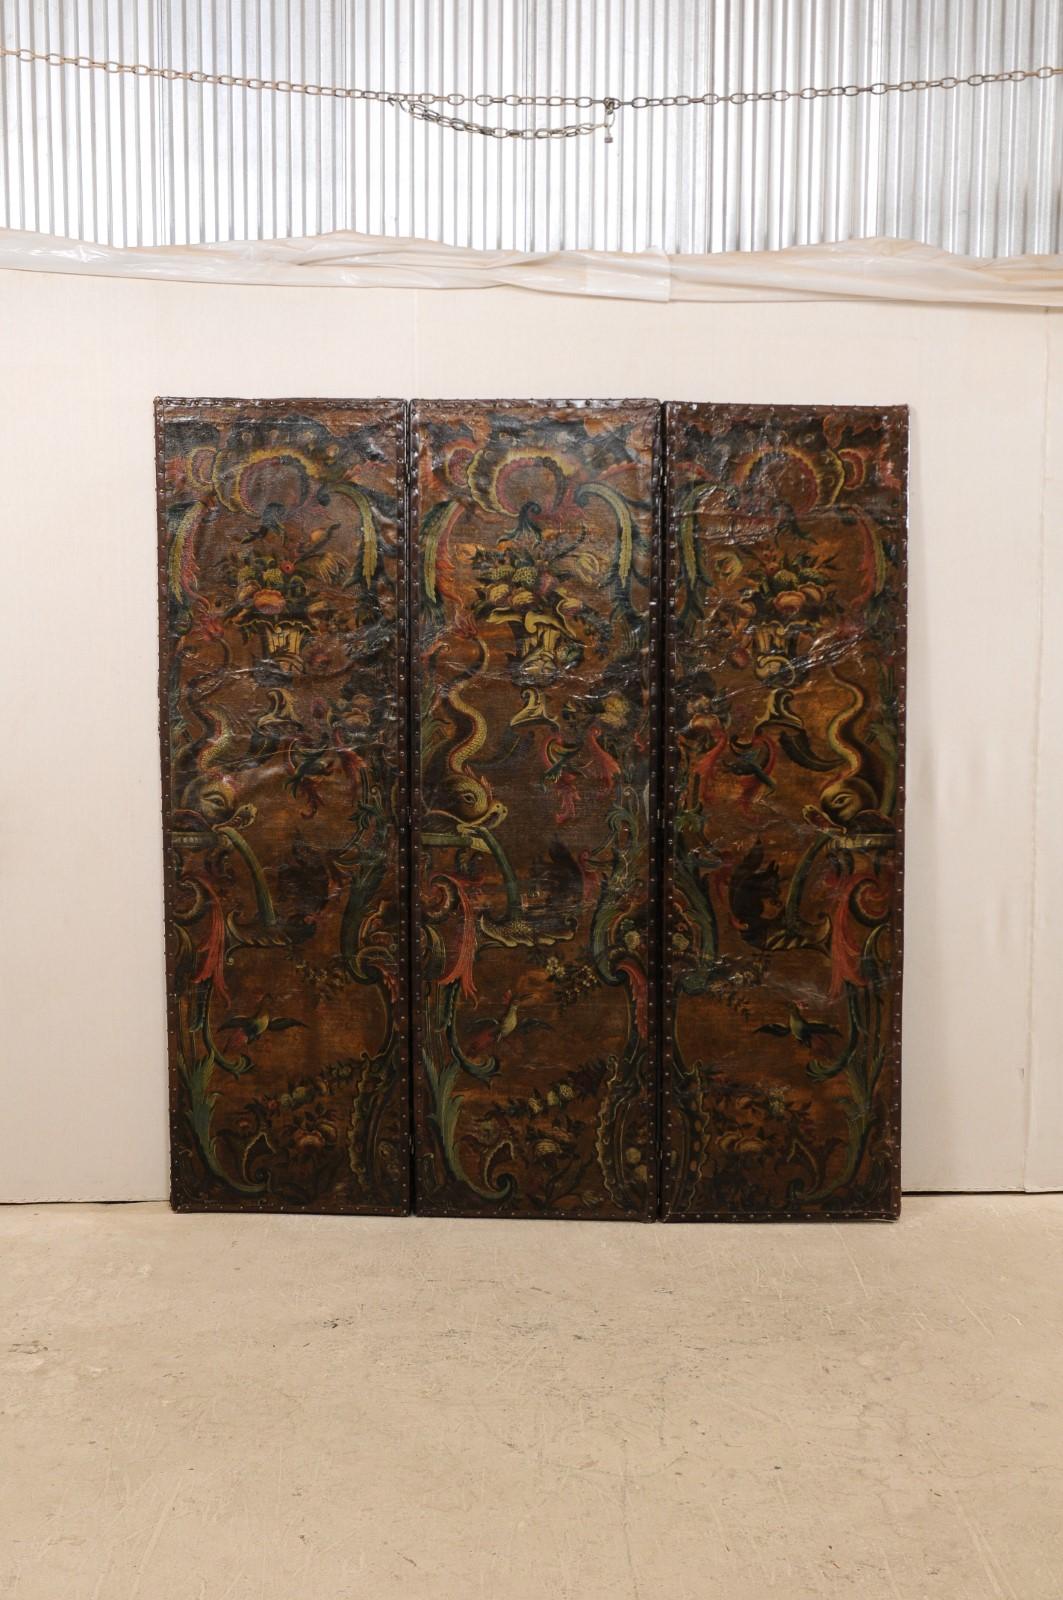 A fabulous Italian pair of 7 ft. tall leather embossed folding screens from the turn of the 17th and 18th century. This pair of antique accordion style folding screens from Italy each features three connected panels, each rectangular in shape, whose